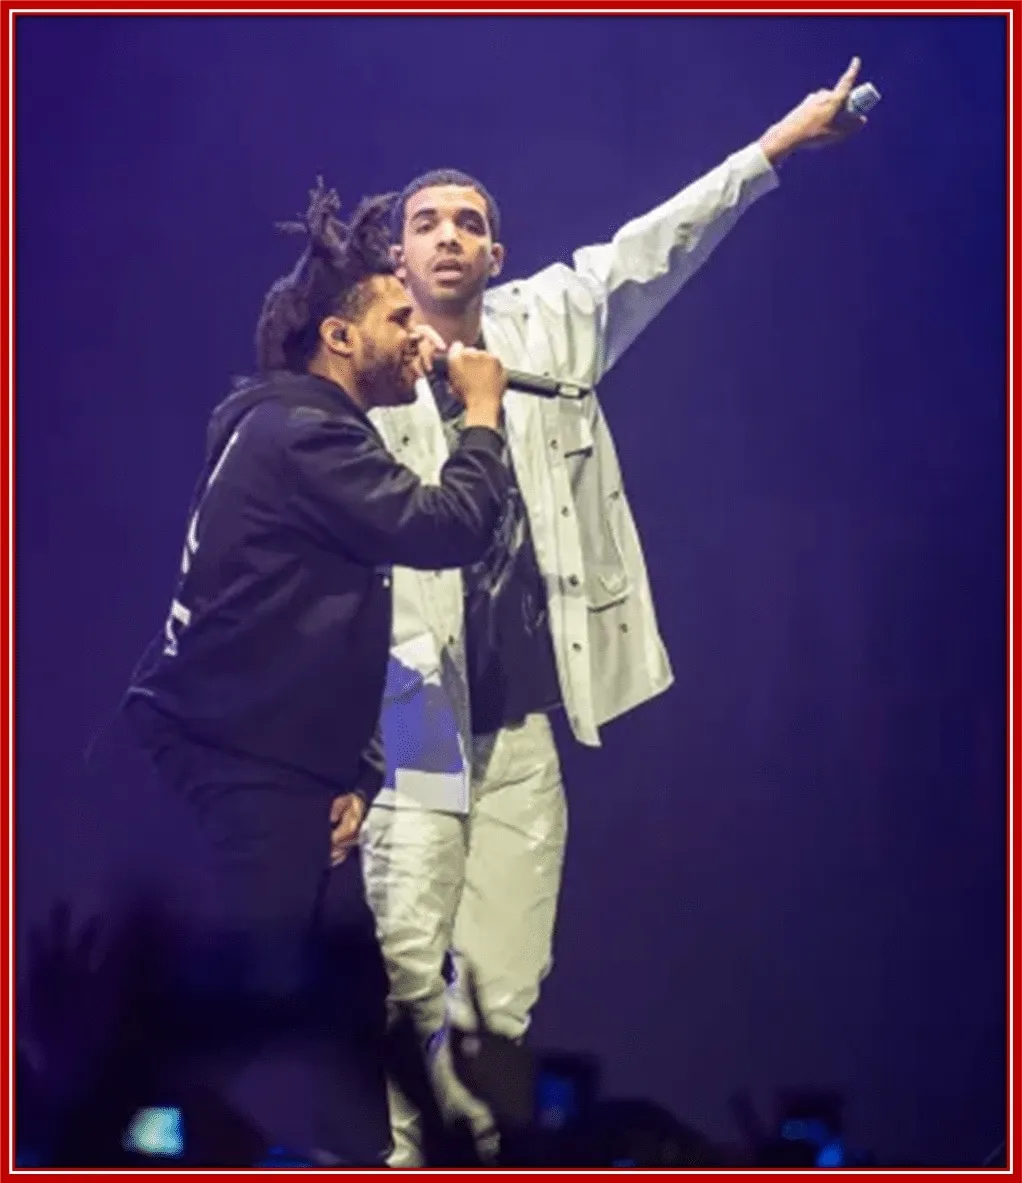 The Weeknd's collaborative act with Drake as a vocalist.